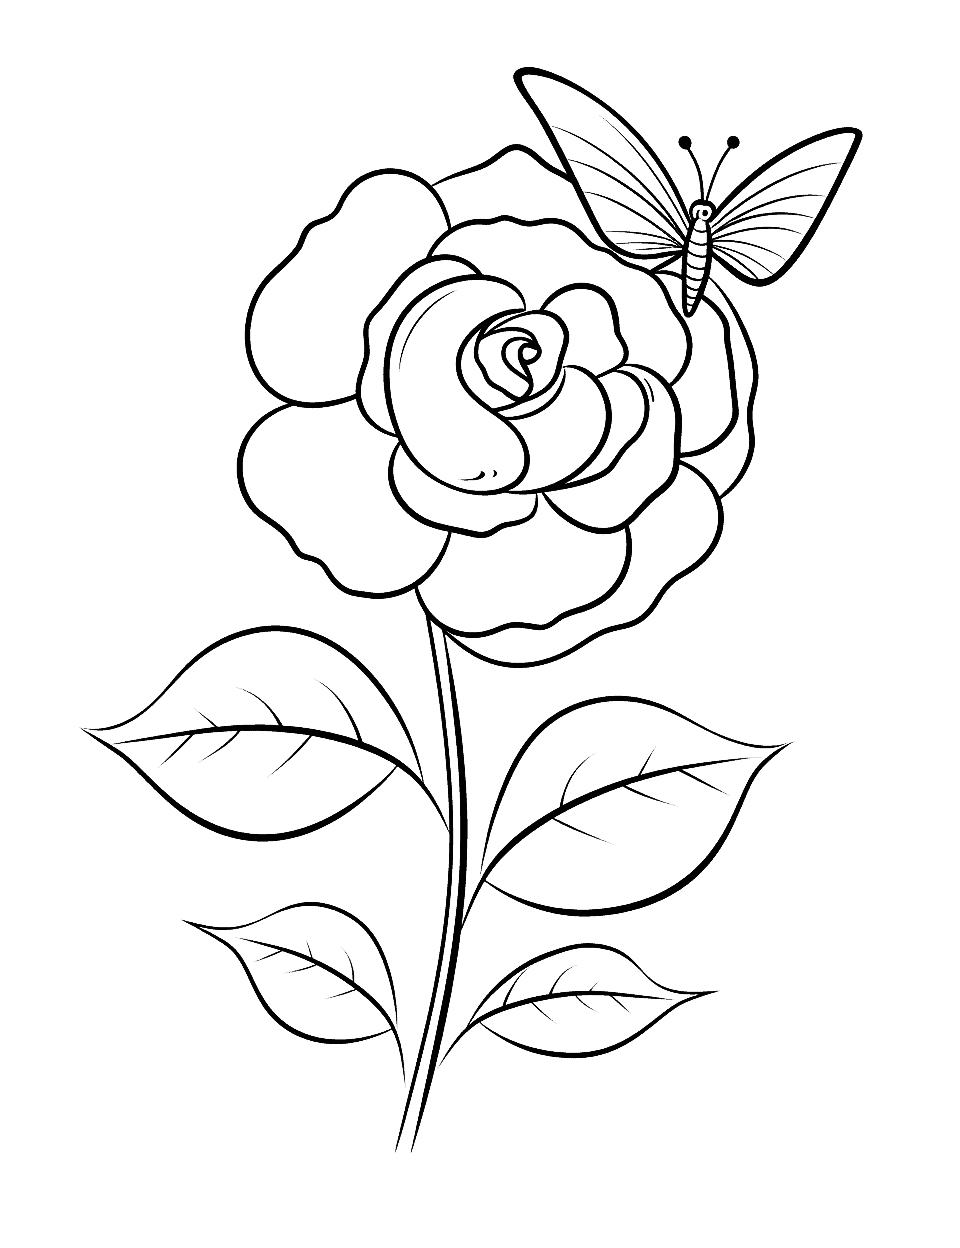 Butterfly and the Rose Flower Coloring Page - A cute butterfly fluttering around a beautiful rose.